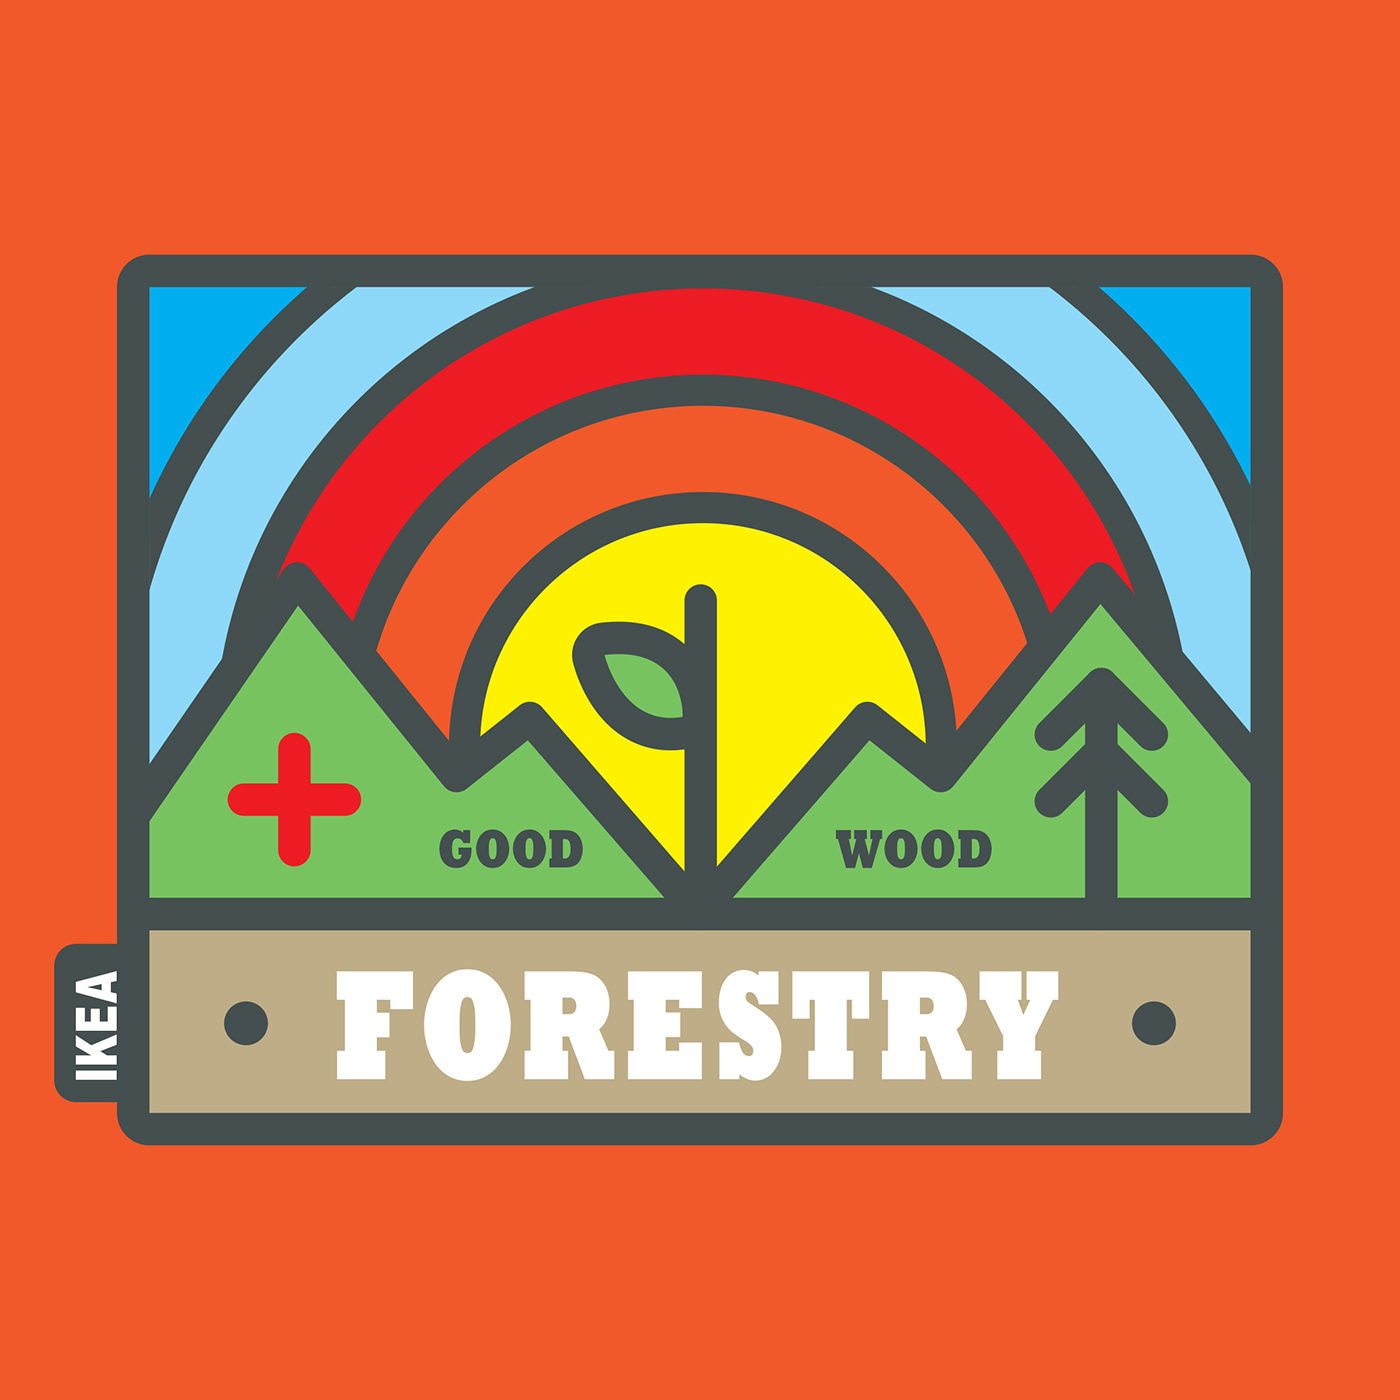 ikea Badges thick lines bold forestry environment labor elements Basic Shapes colorful